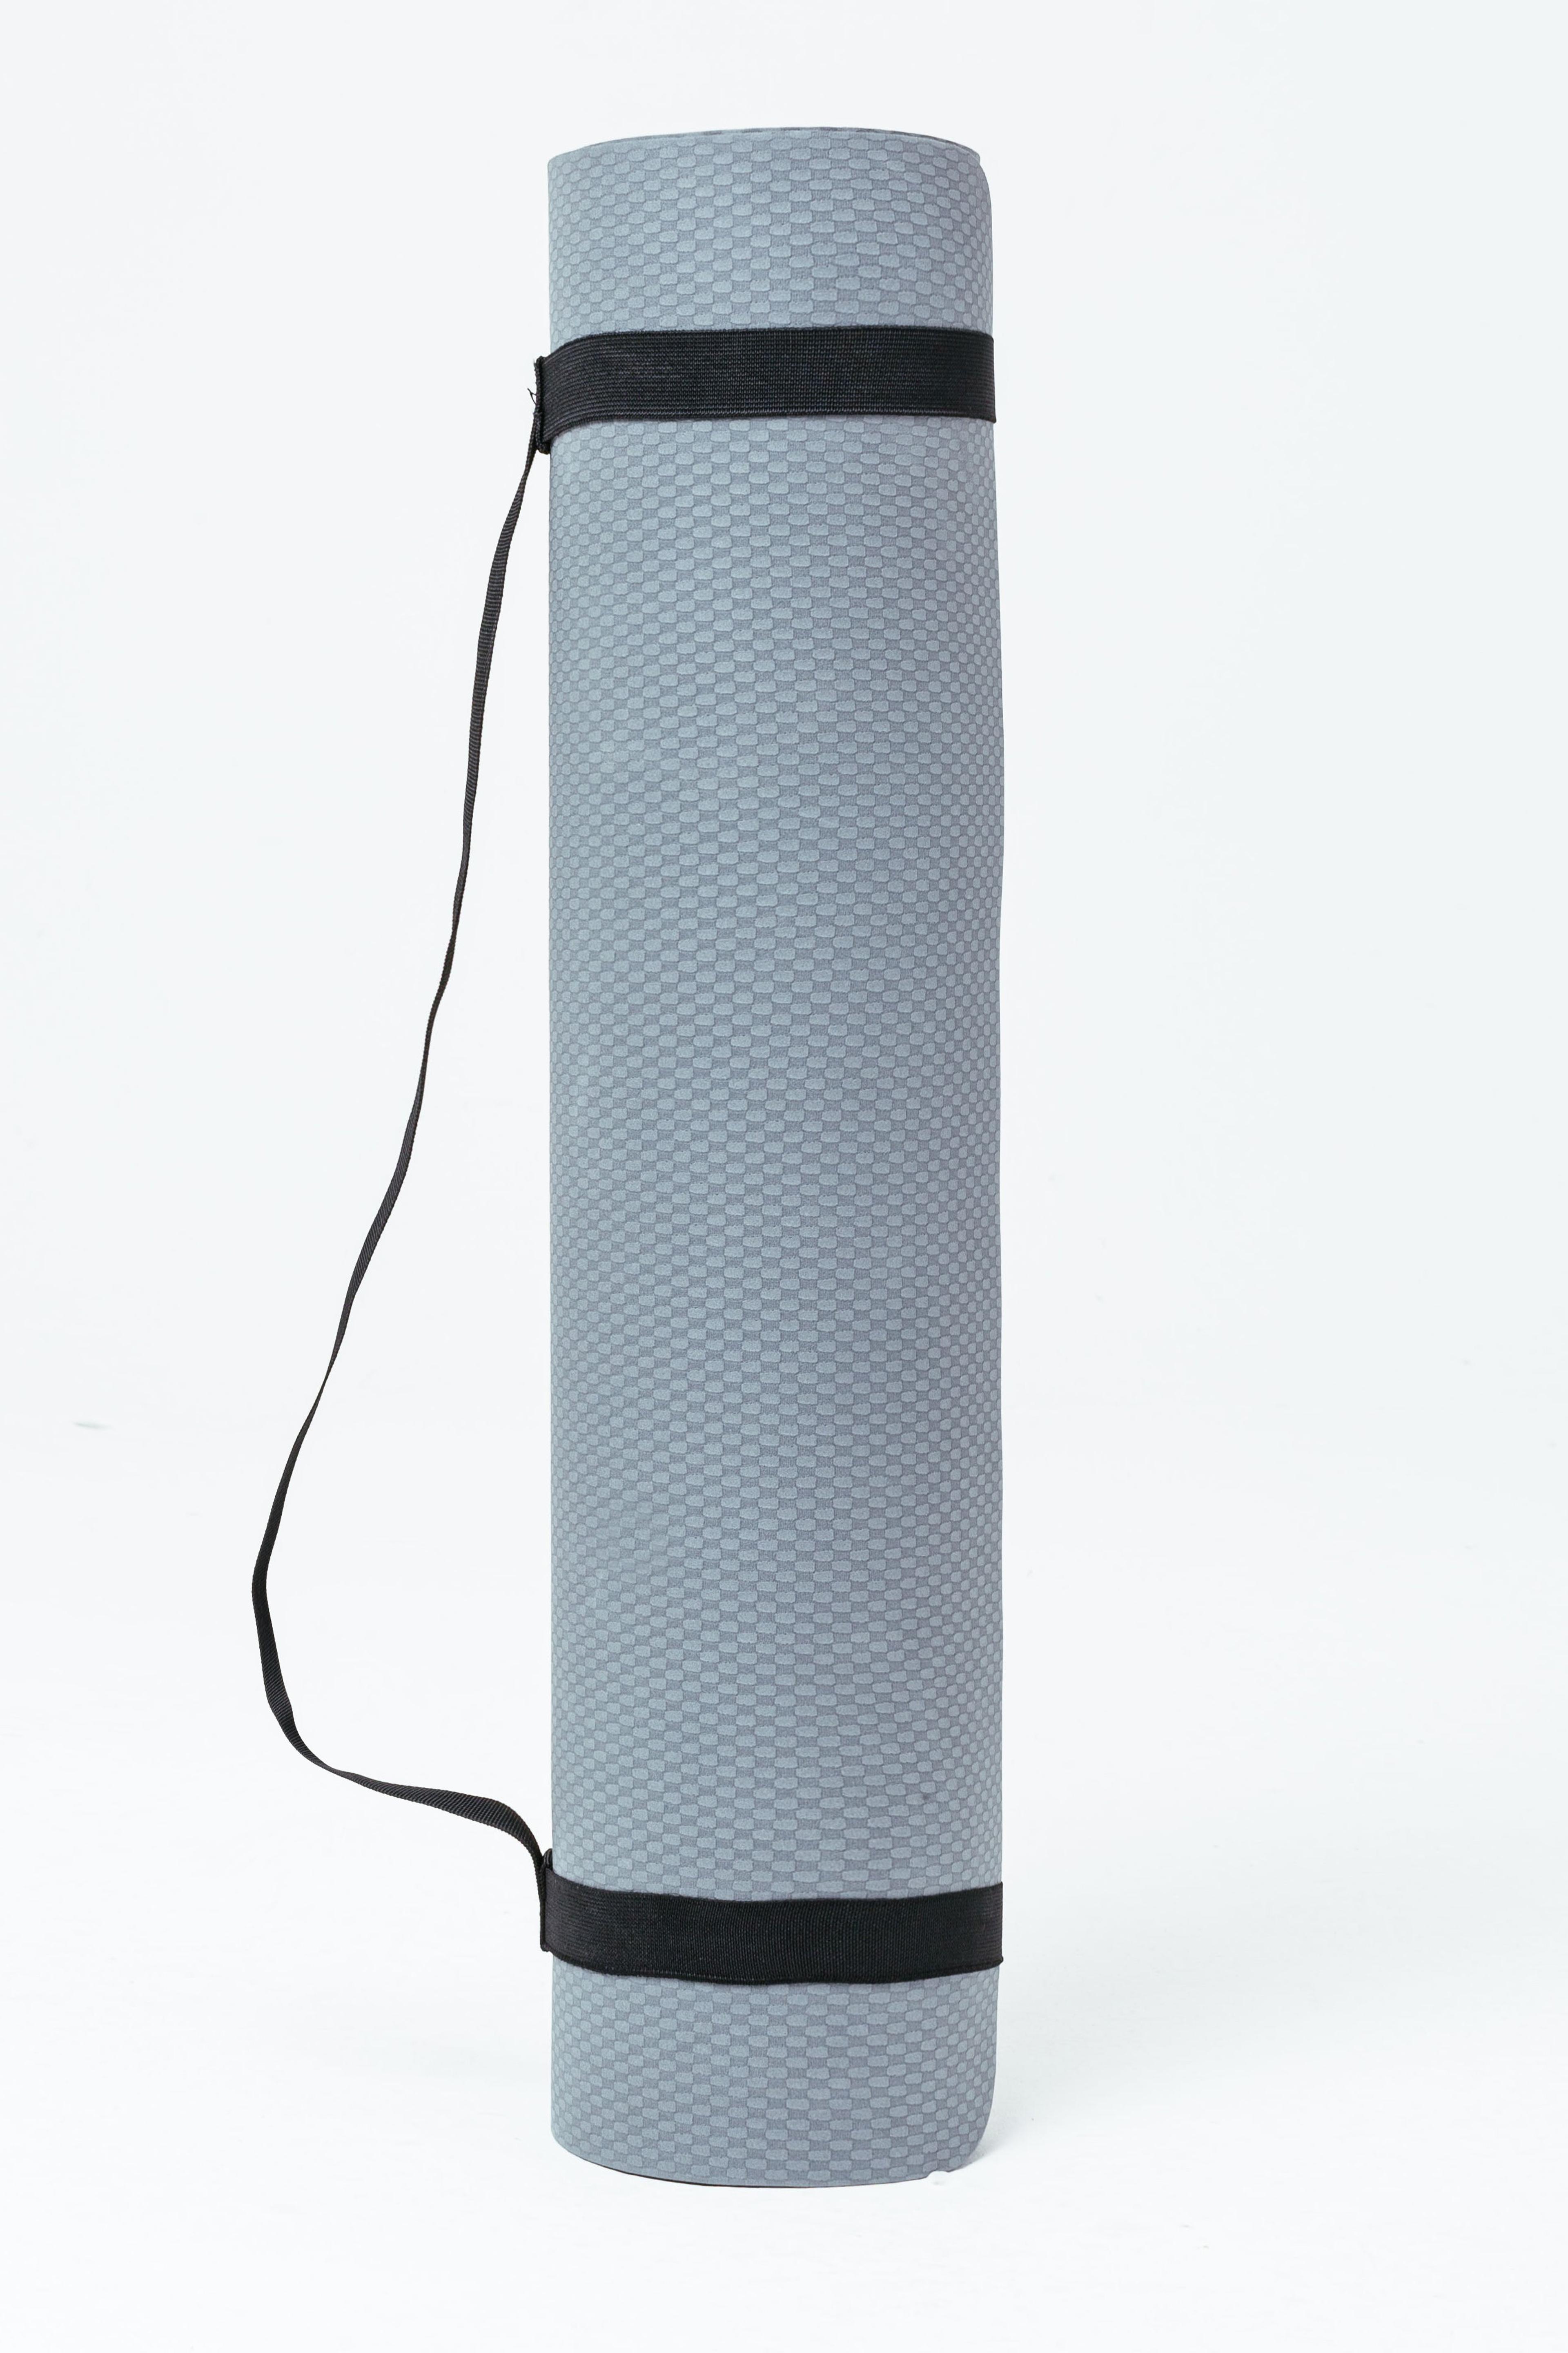 Alternate View 5 of HYPE TWO TONE GREY YOGA MAT